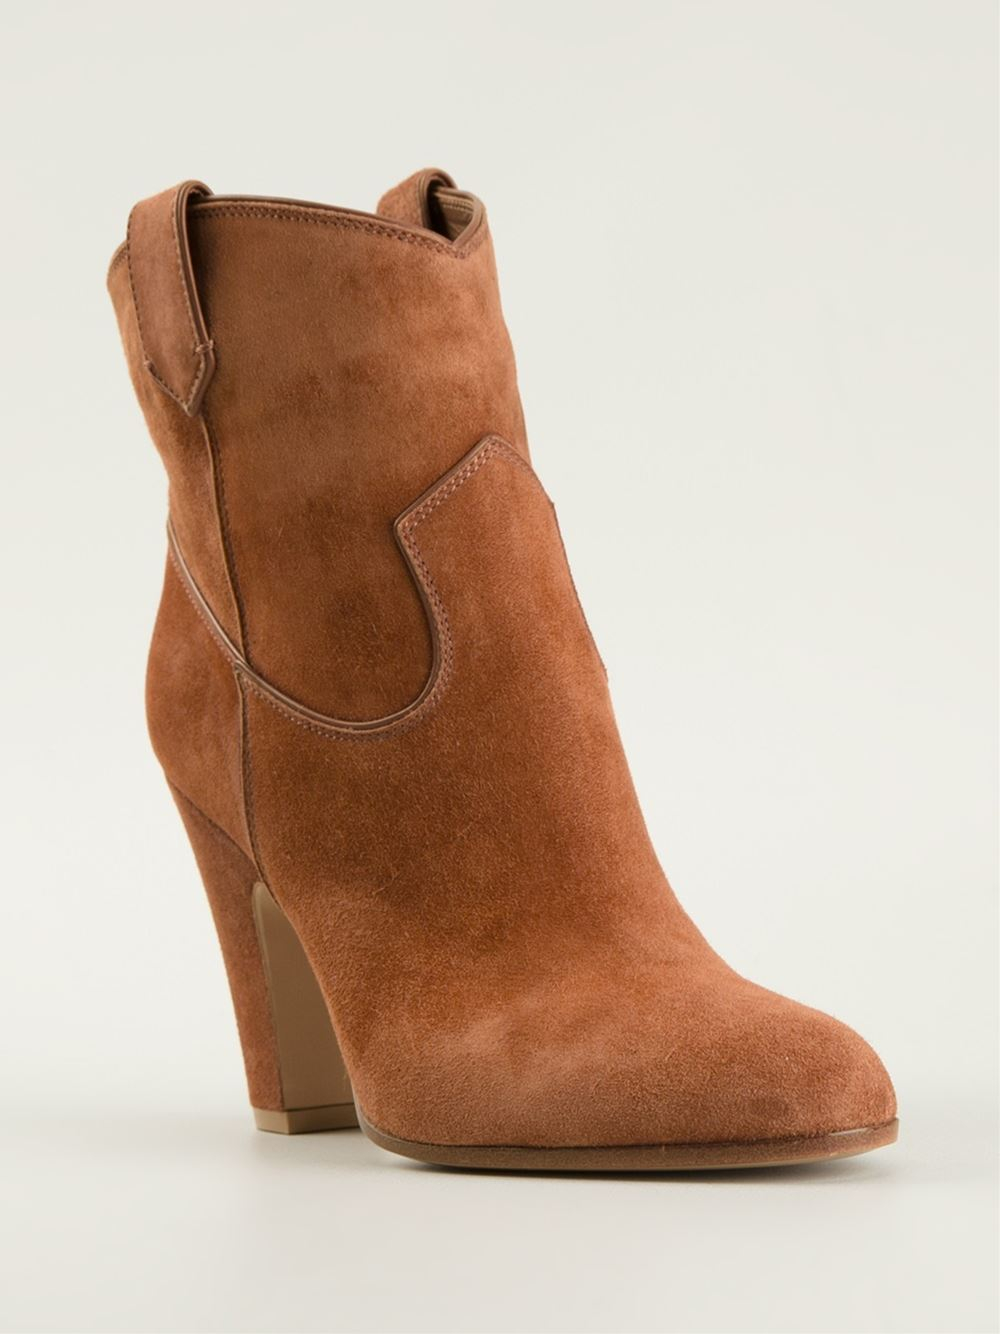 Gianvito Rossi Cowboy Style Boots in 